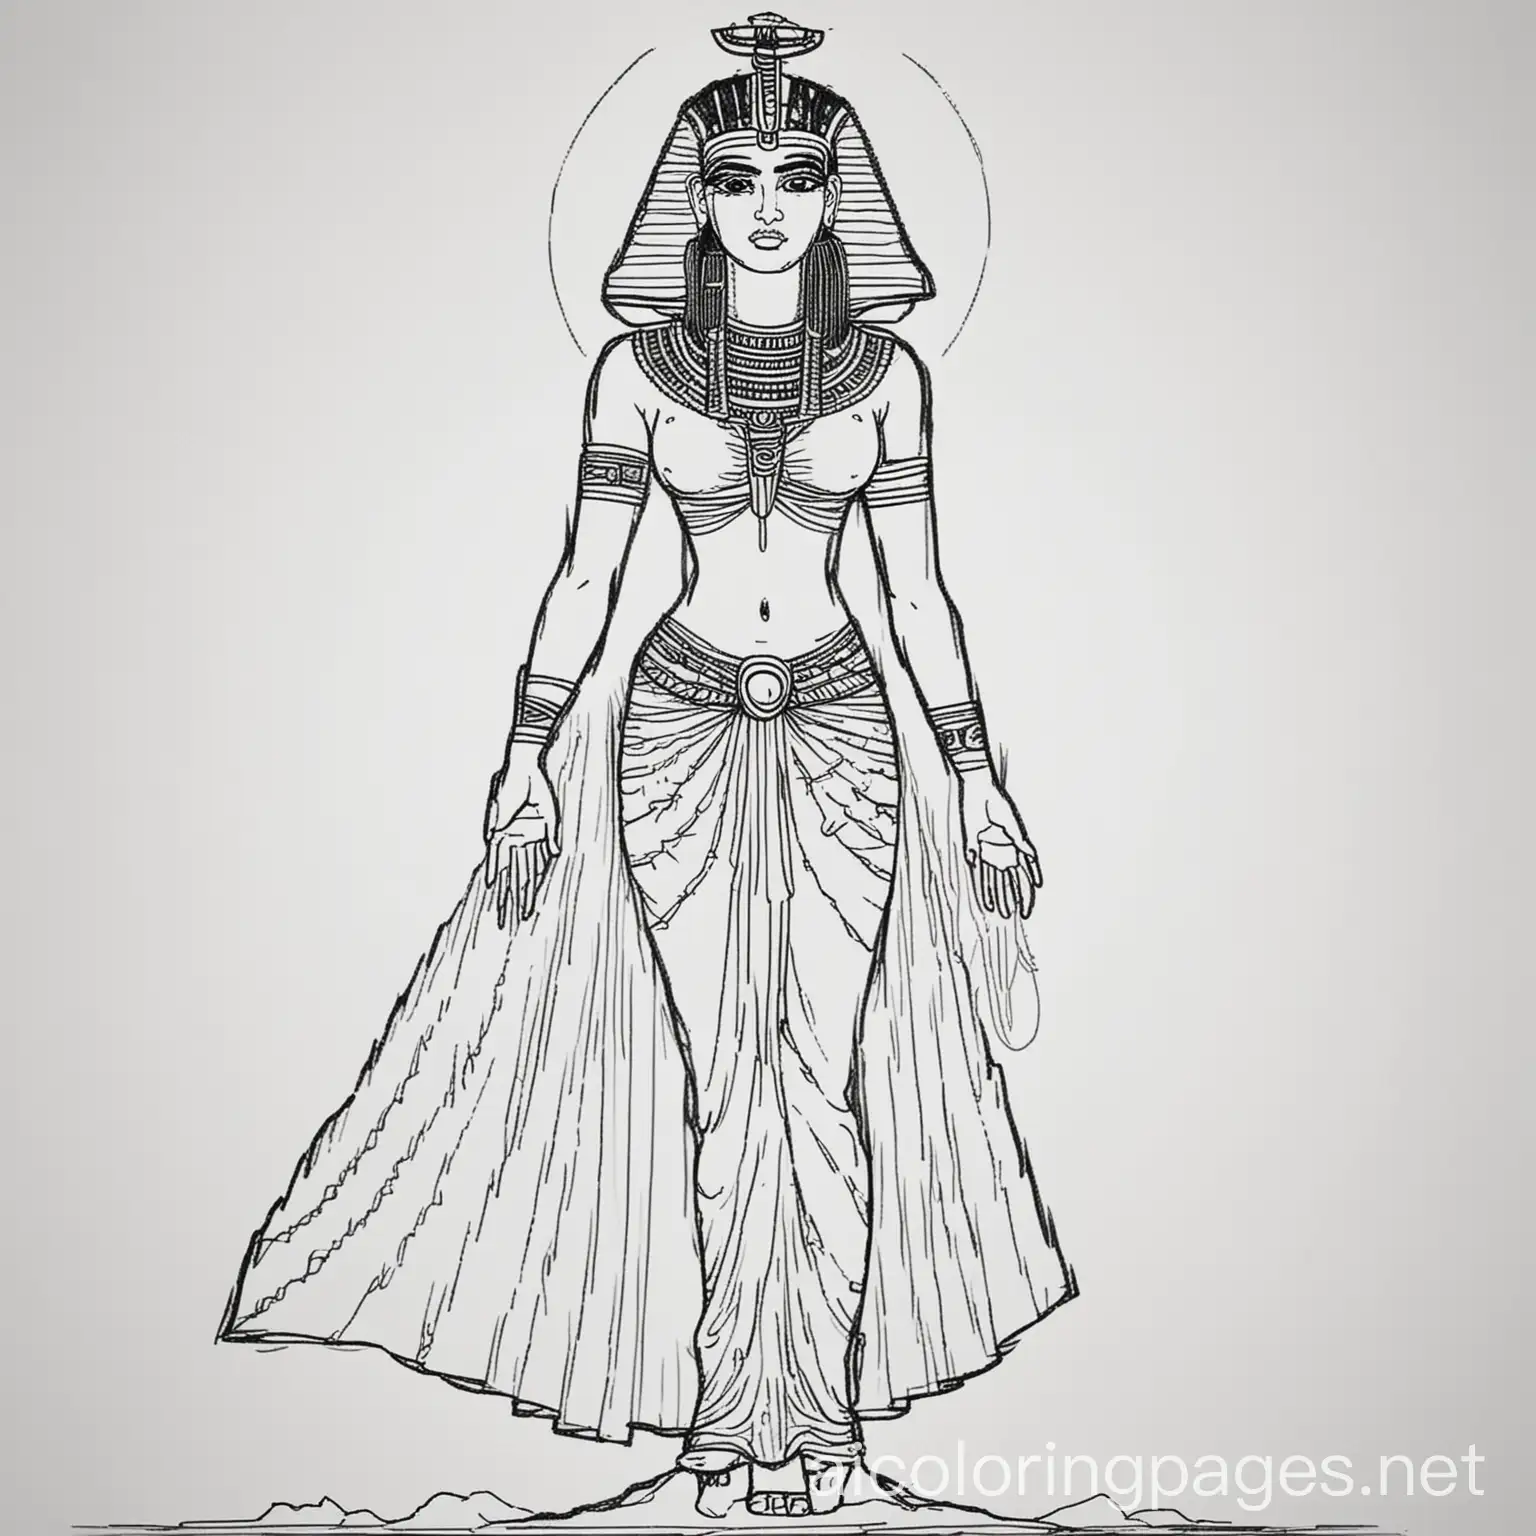 An outline of Isis the Egyptian goddess, Coloring Page, black and white, line art, white background, Simplicity, Ample White Space. The background of the coloring page is plain white to make it easy for young children to color within the lines. The outlines of all the subjects are easy to distinguish, making it simple for kids to color without too much difficulty